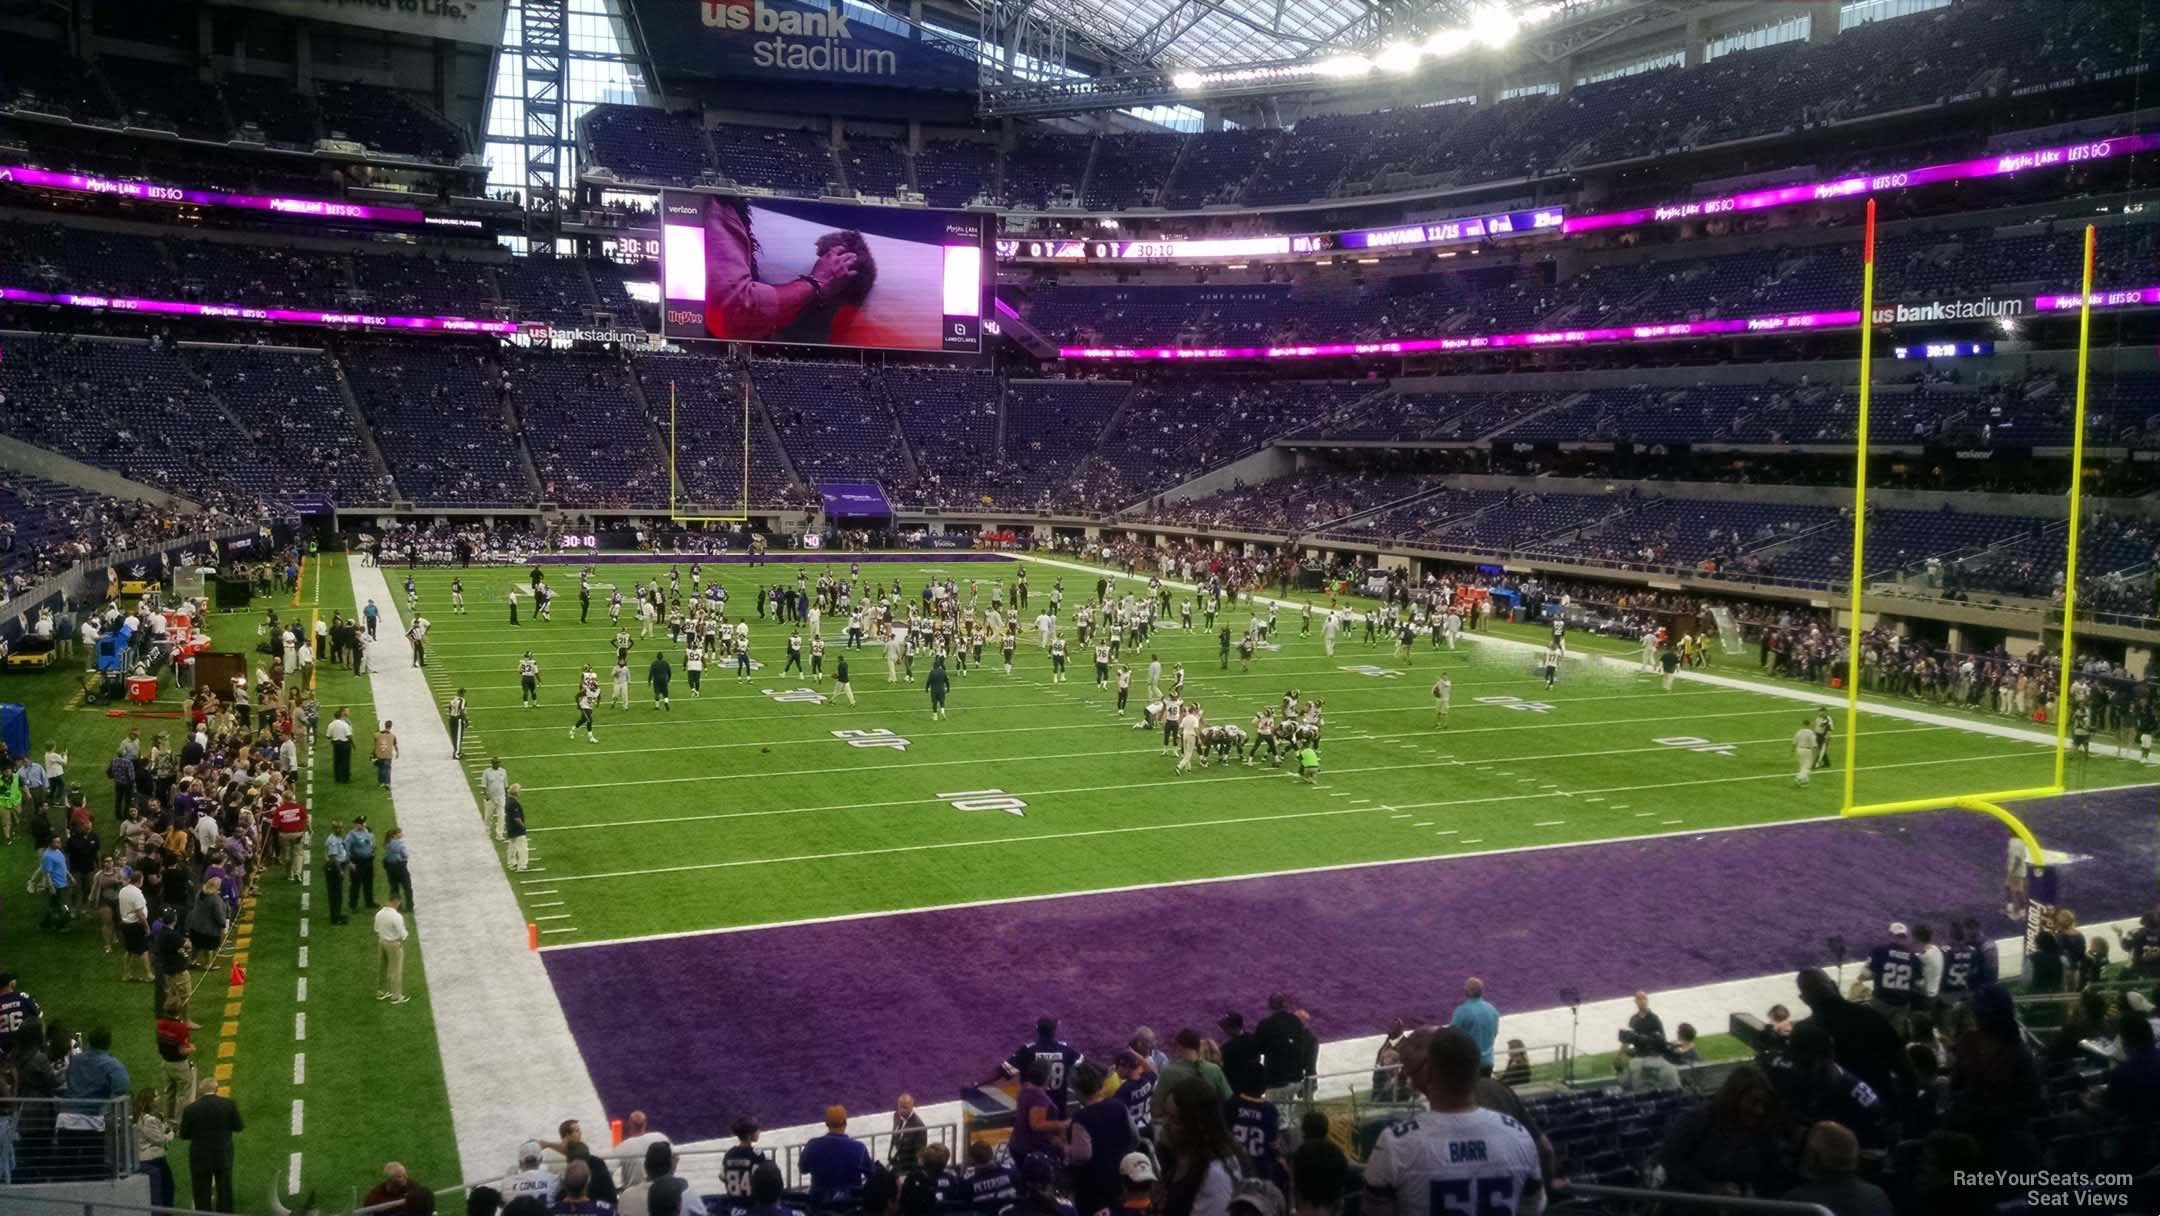 section 101, row 20 seat view  for football - u.s. bank stadium